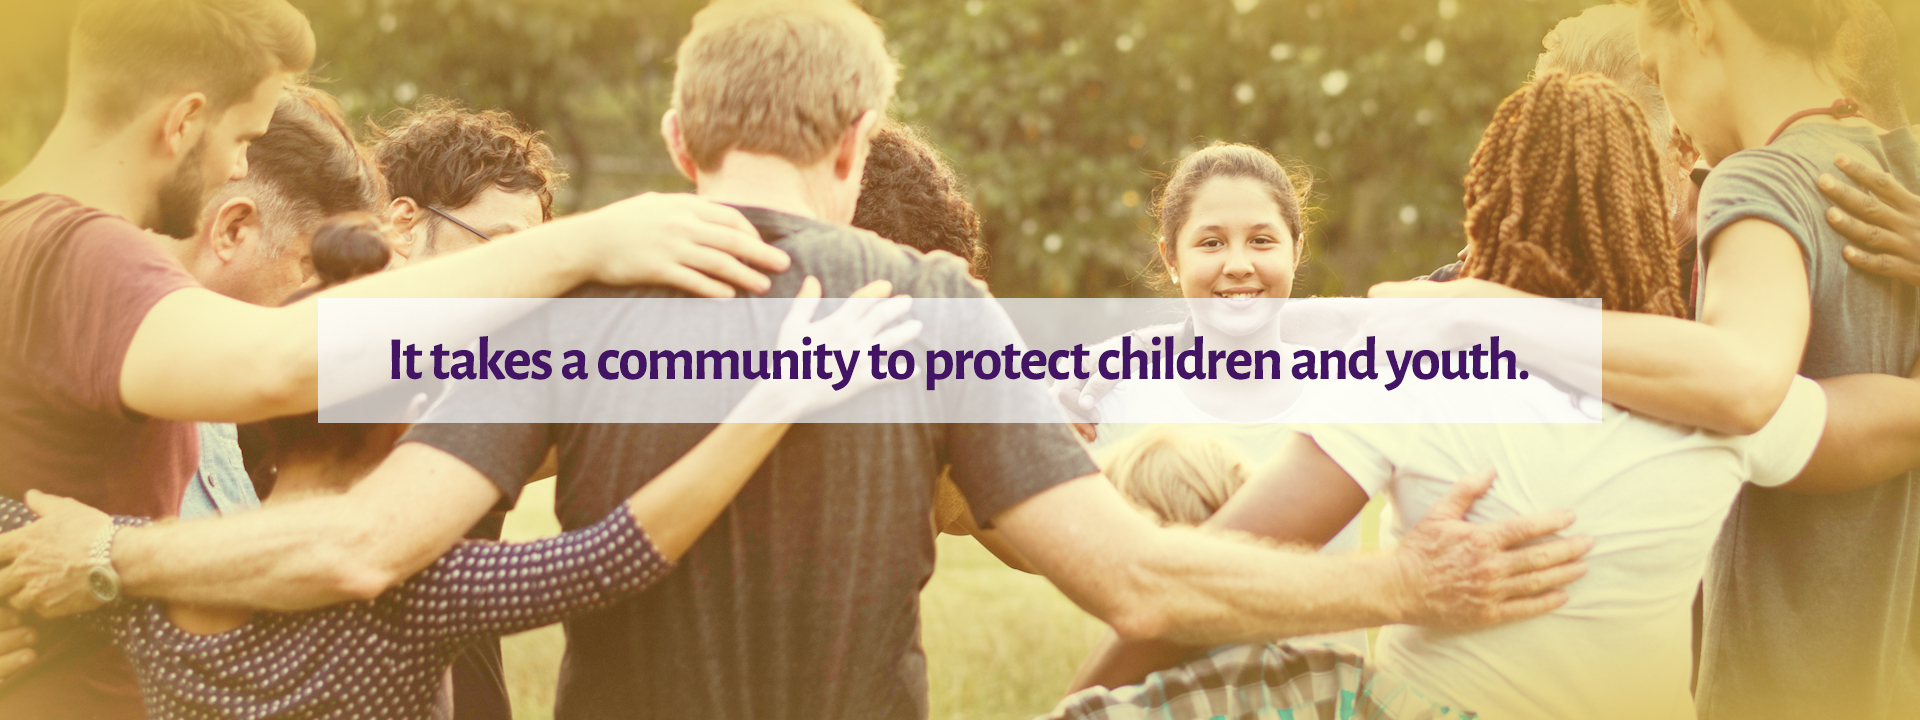 It takes a community to protect children and youth.